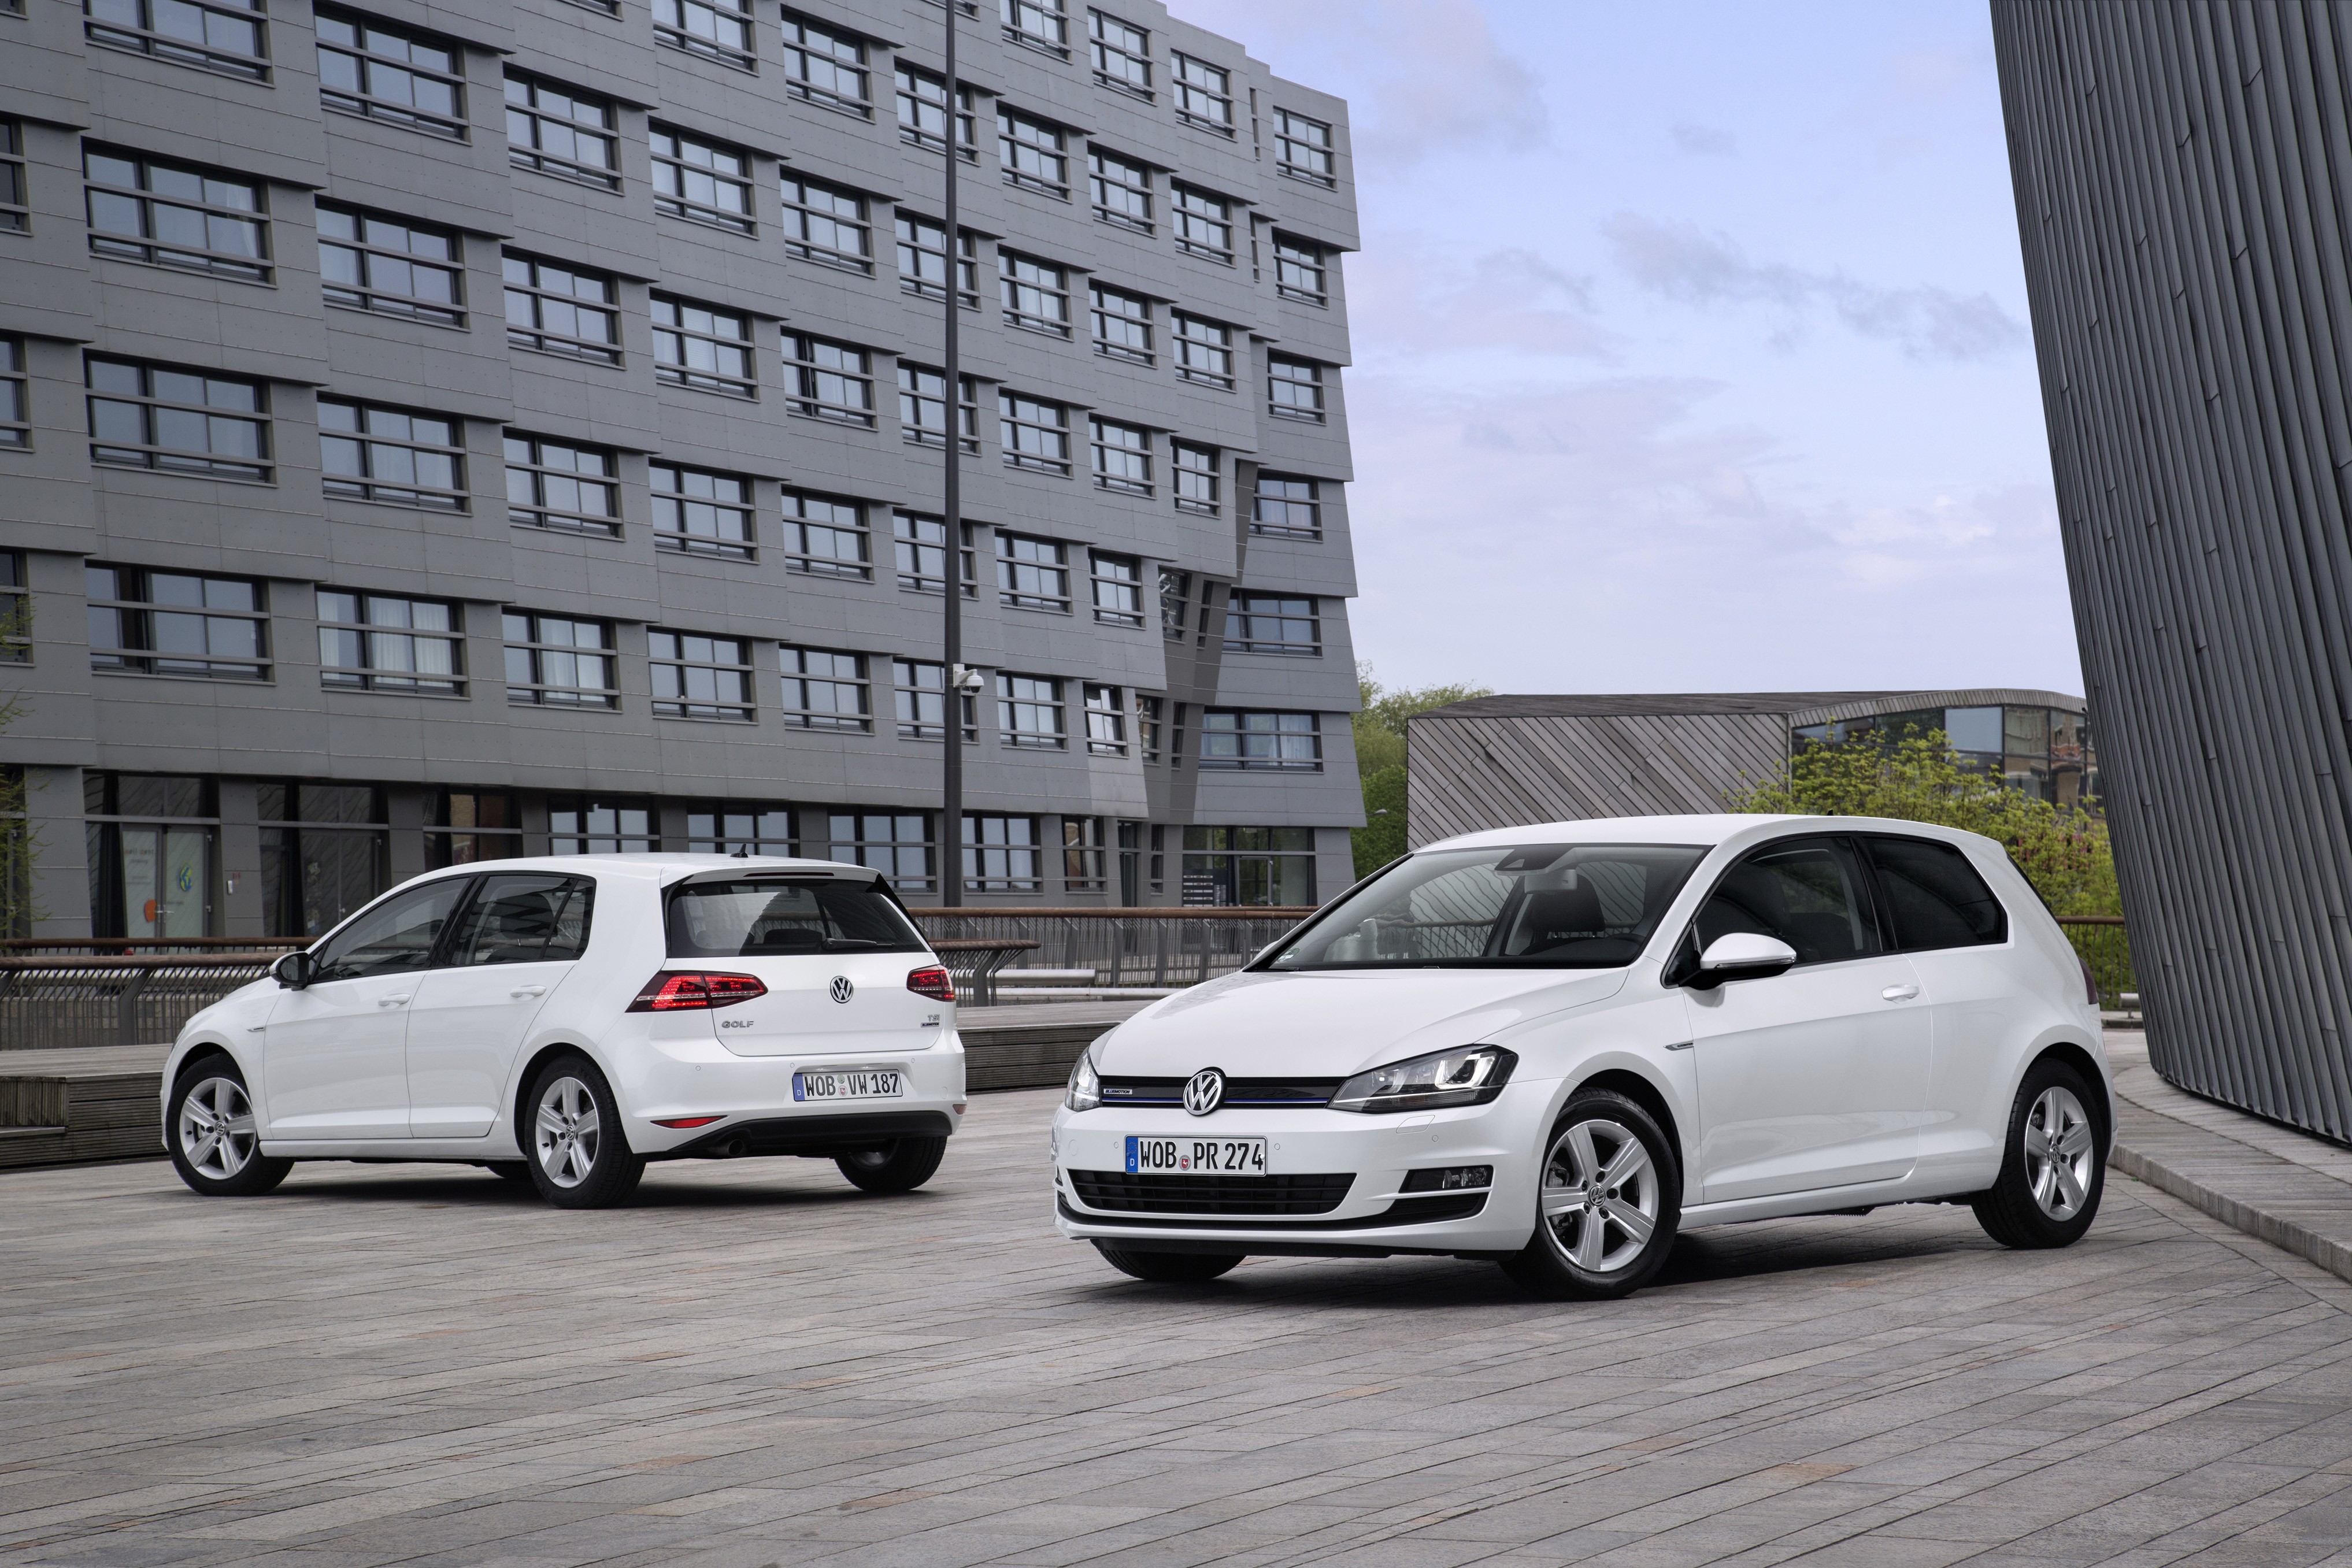 Volkswagen Golf 1.0 TSI BlueMotion Debuts With 3Cylinder